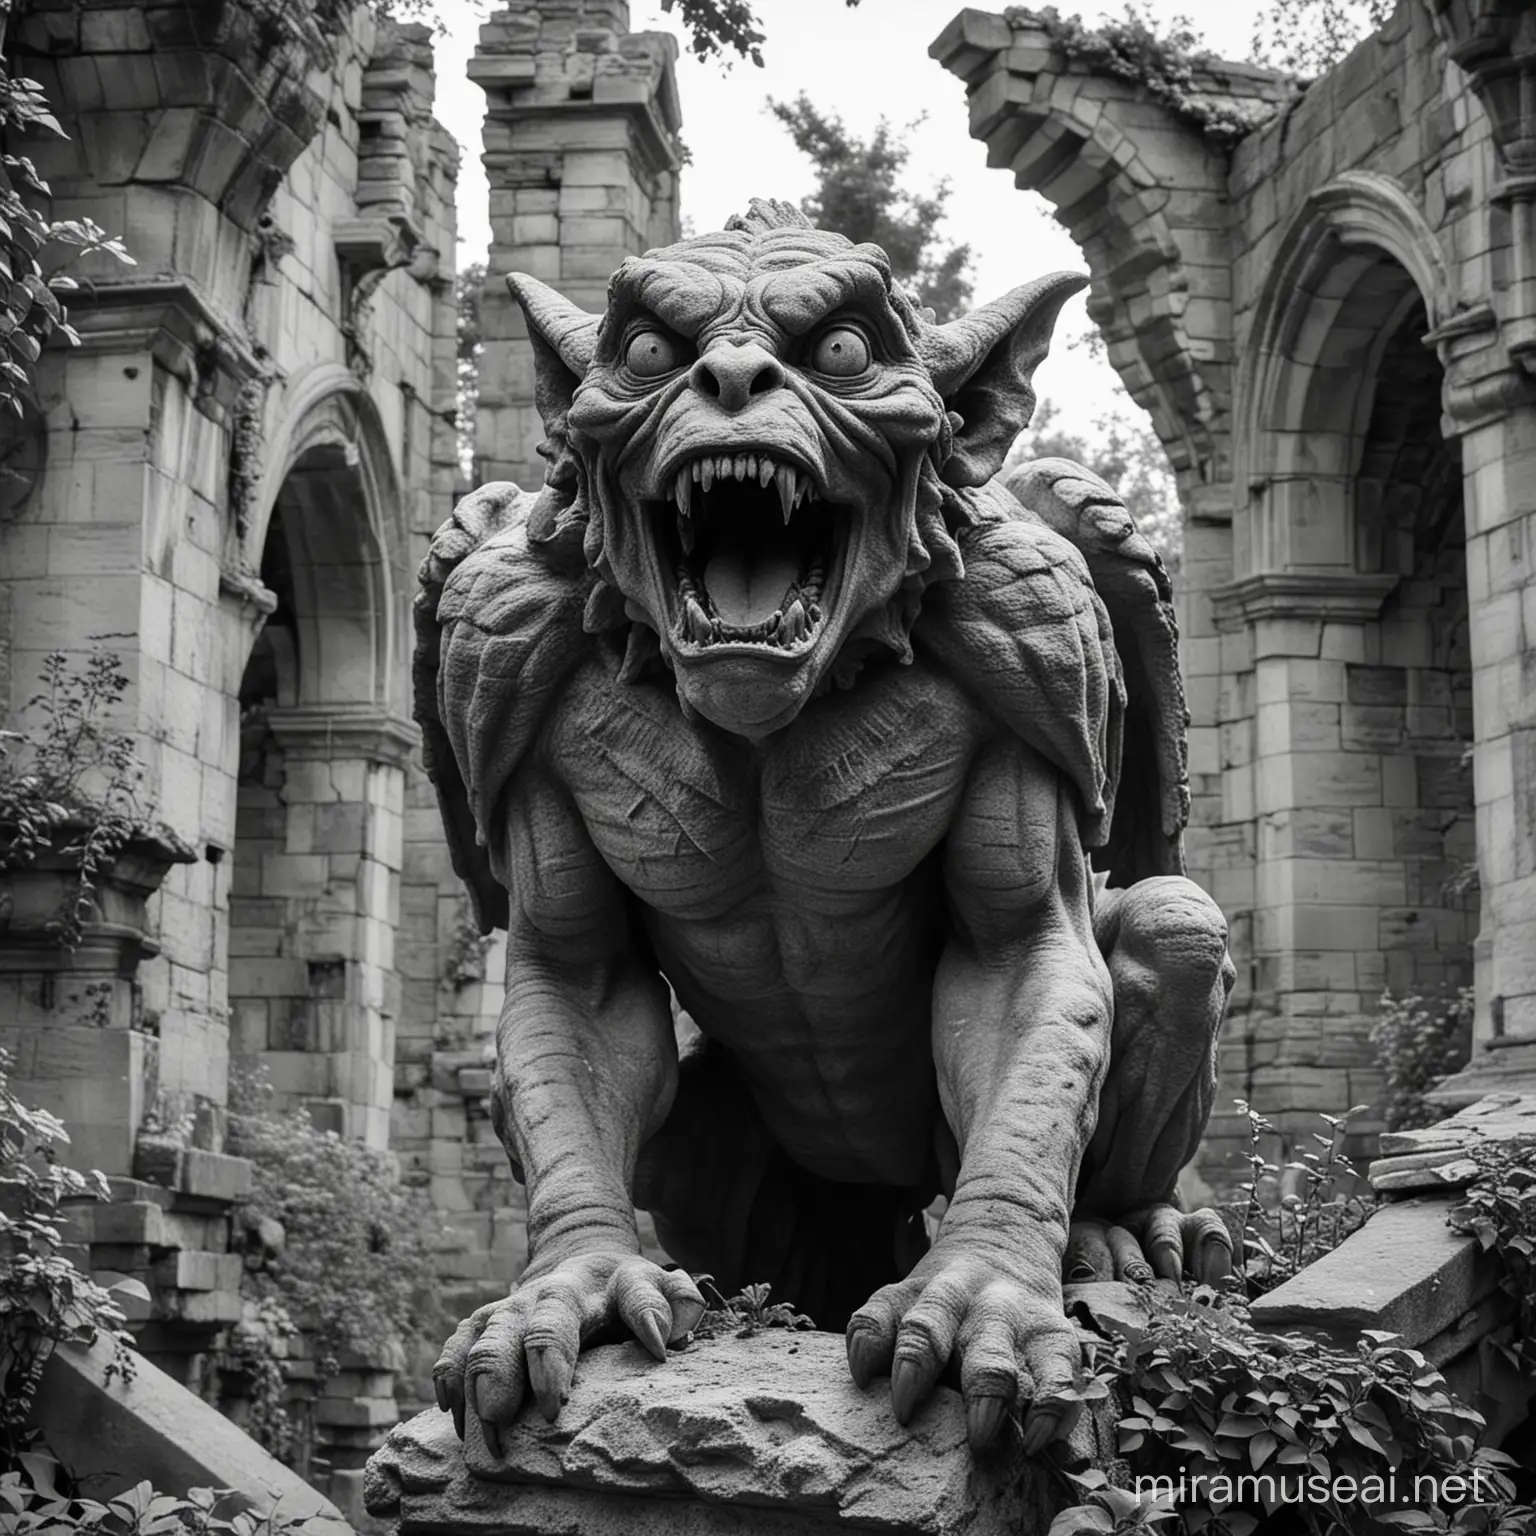 Eerie Black and White Image of Overgrown Screaming Gargoyle Statue in Ruins